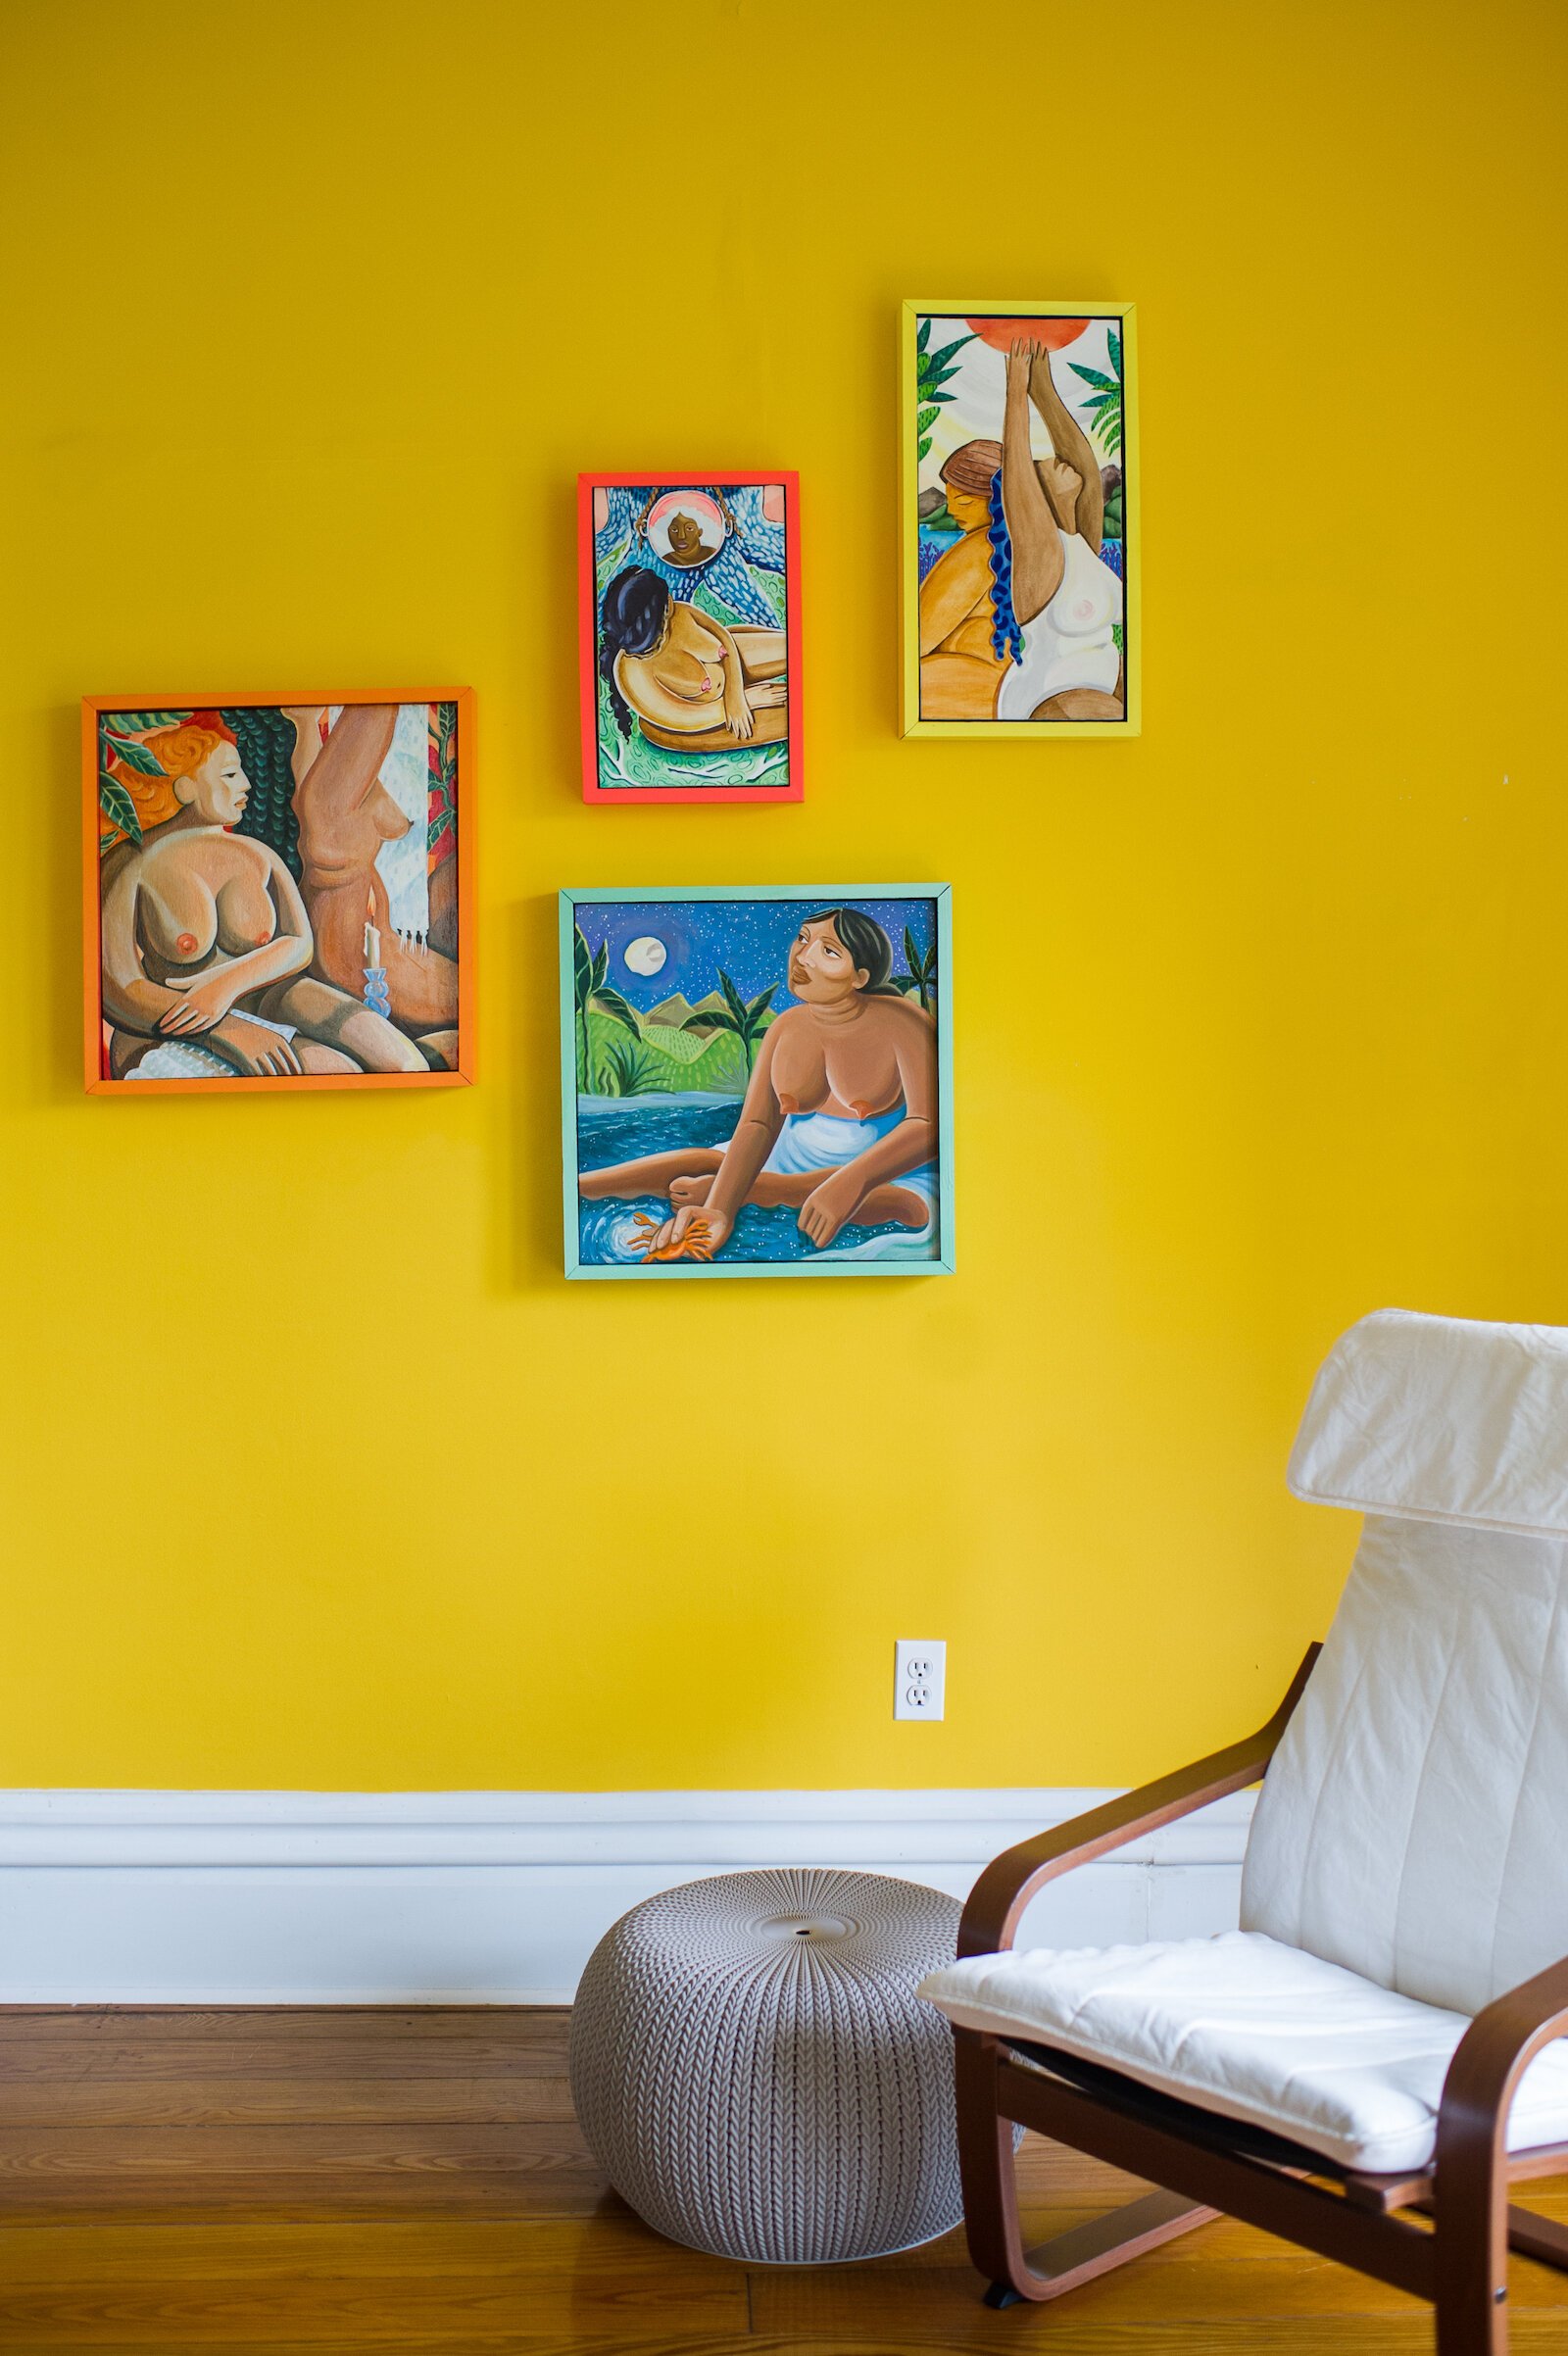 Fort Wayne artist AfroPlump's work displayed at the Stay Home Gallery in Paris, Tenn.